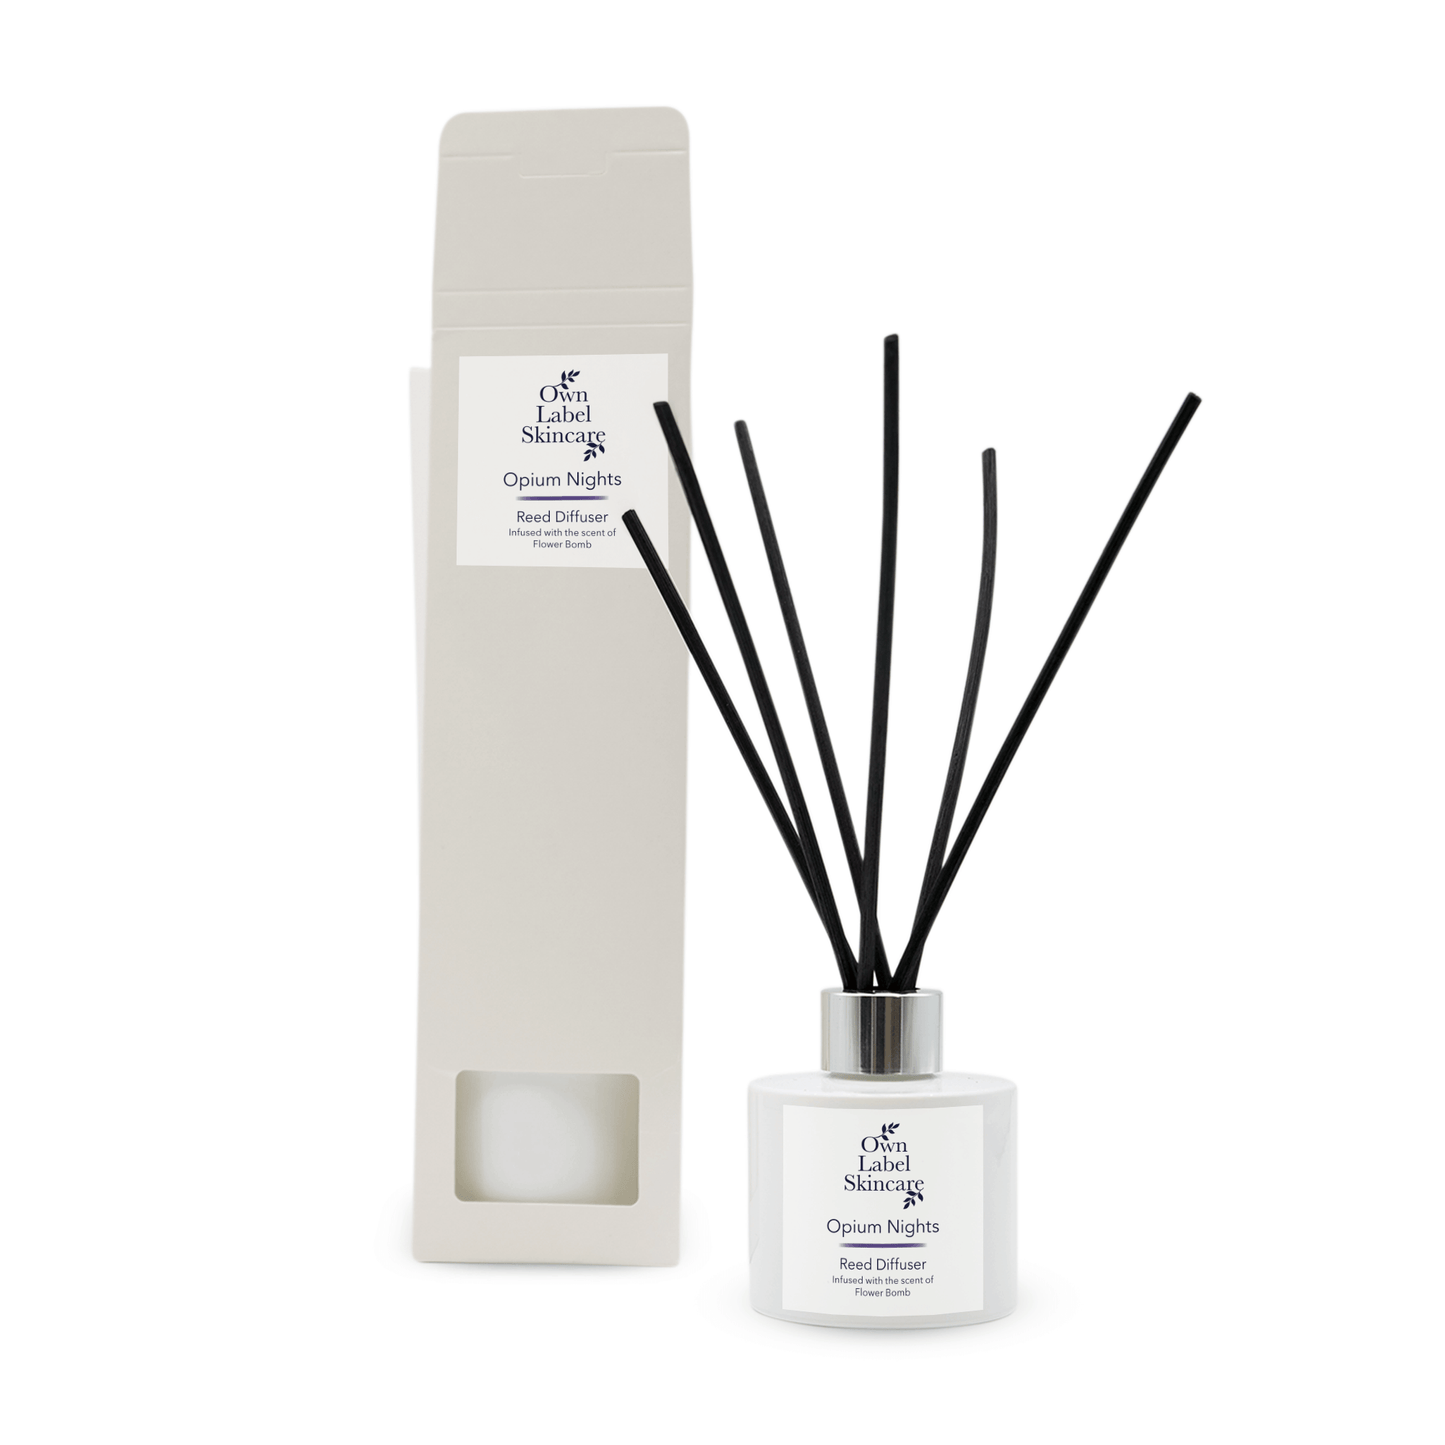 Opium Nights Reed Diffuser Own Label